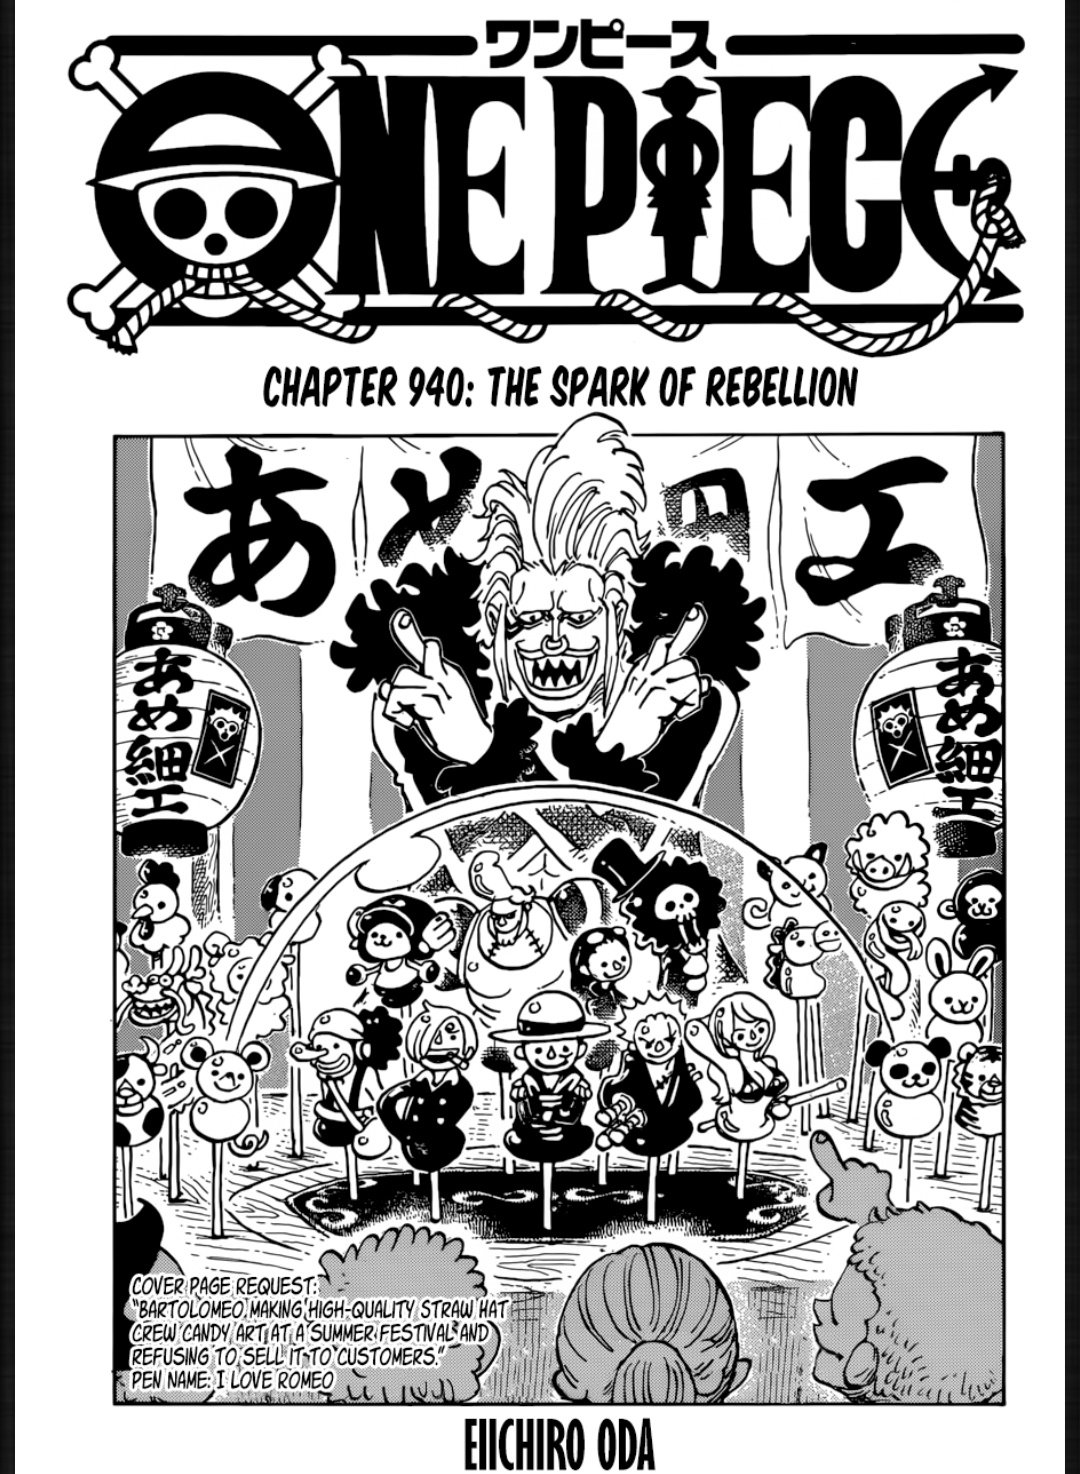 O Xrhsths Haya𓆓 민우 Sto Twitter Spoiler One Piece Chapter 940 Bartolomeo Where Is Jinbei But As Always This Man Is So Relatable T Co Dsdsctrtls Twitter